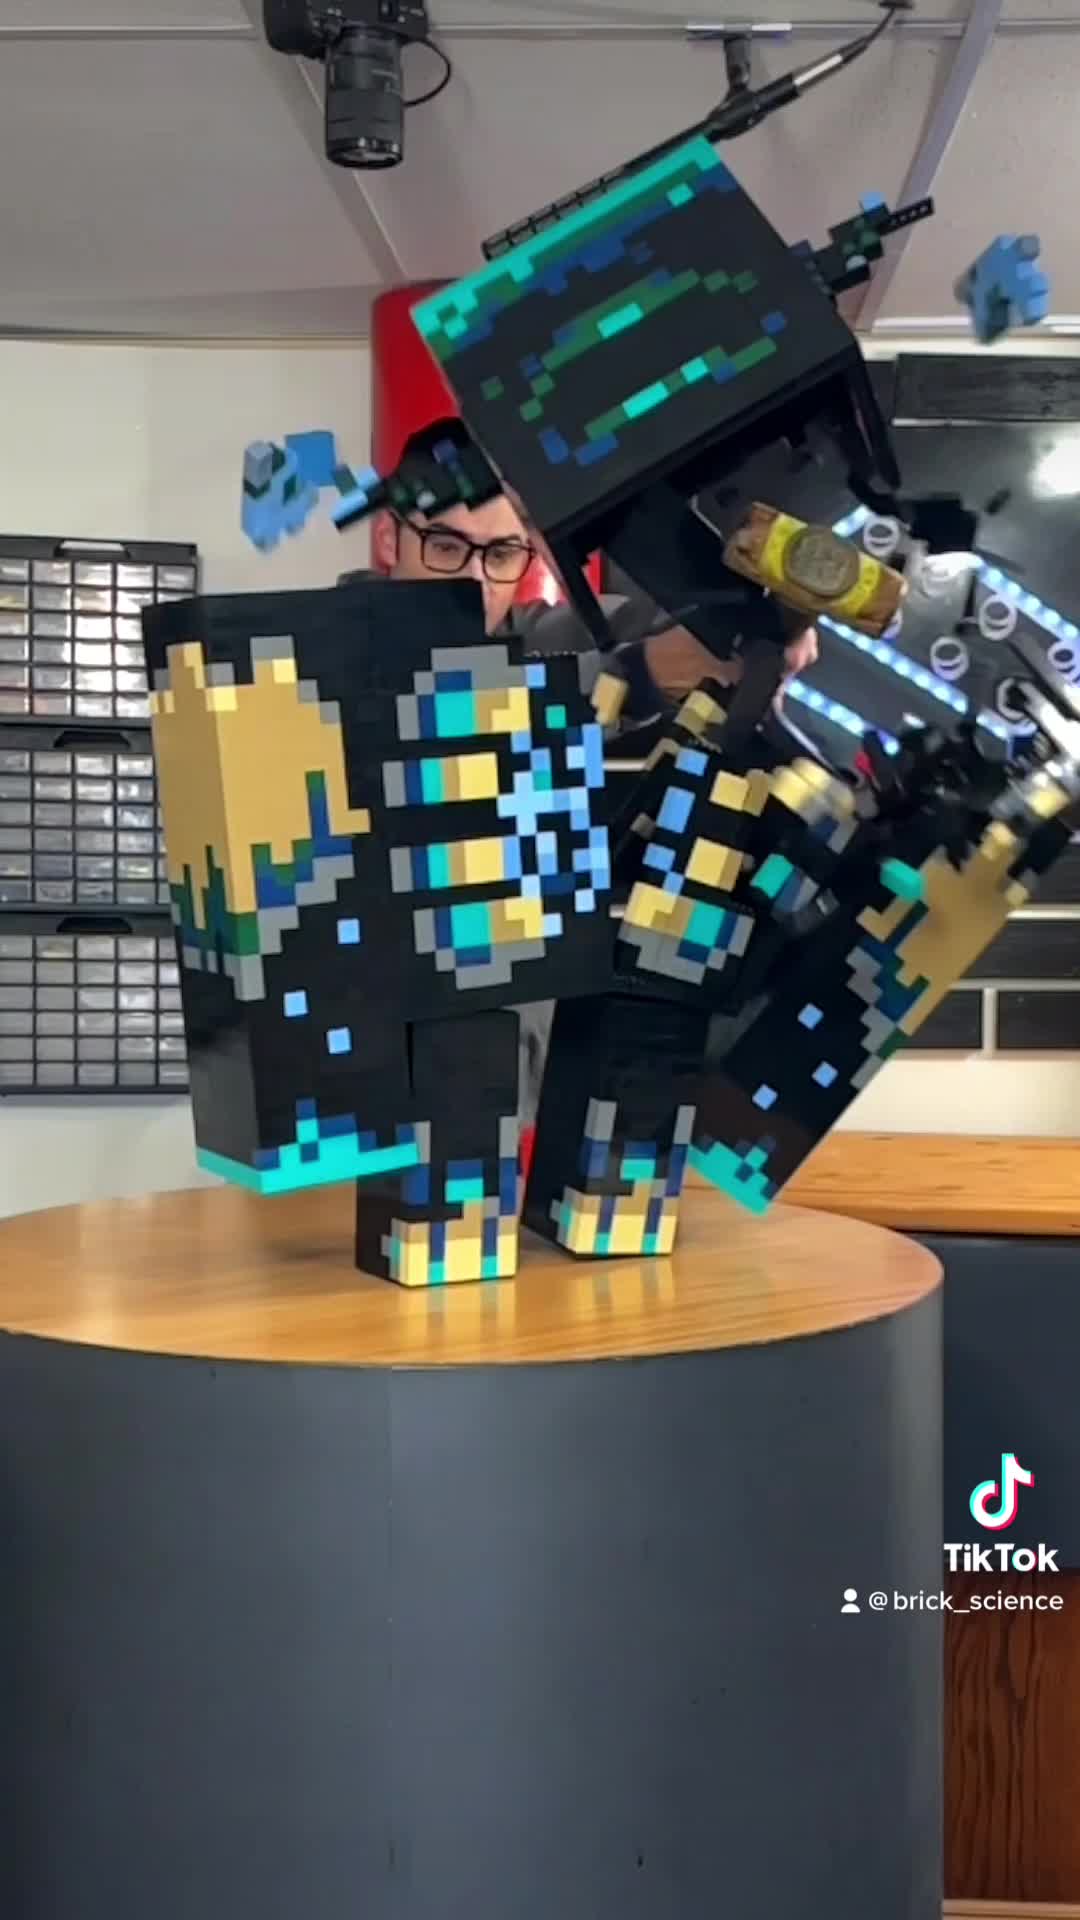 10,000 LEGO Build of the Warden!